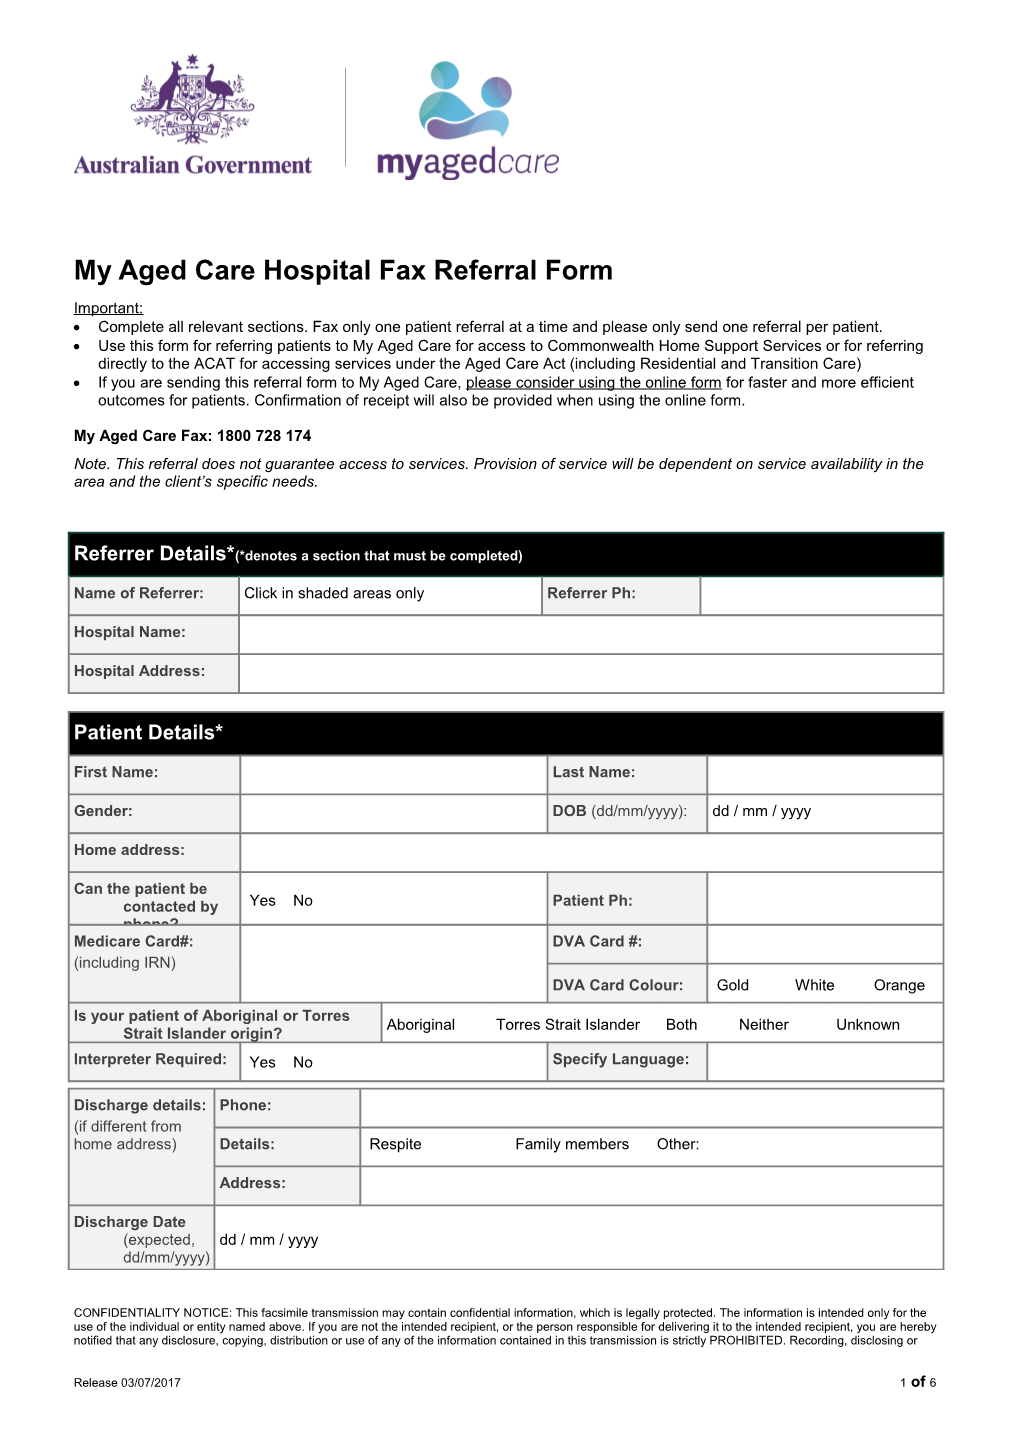 My Aged Care Hospital Fax Referral Form